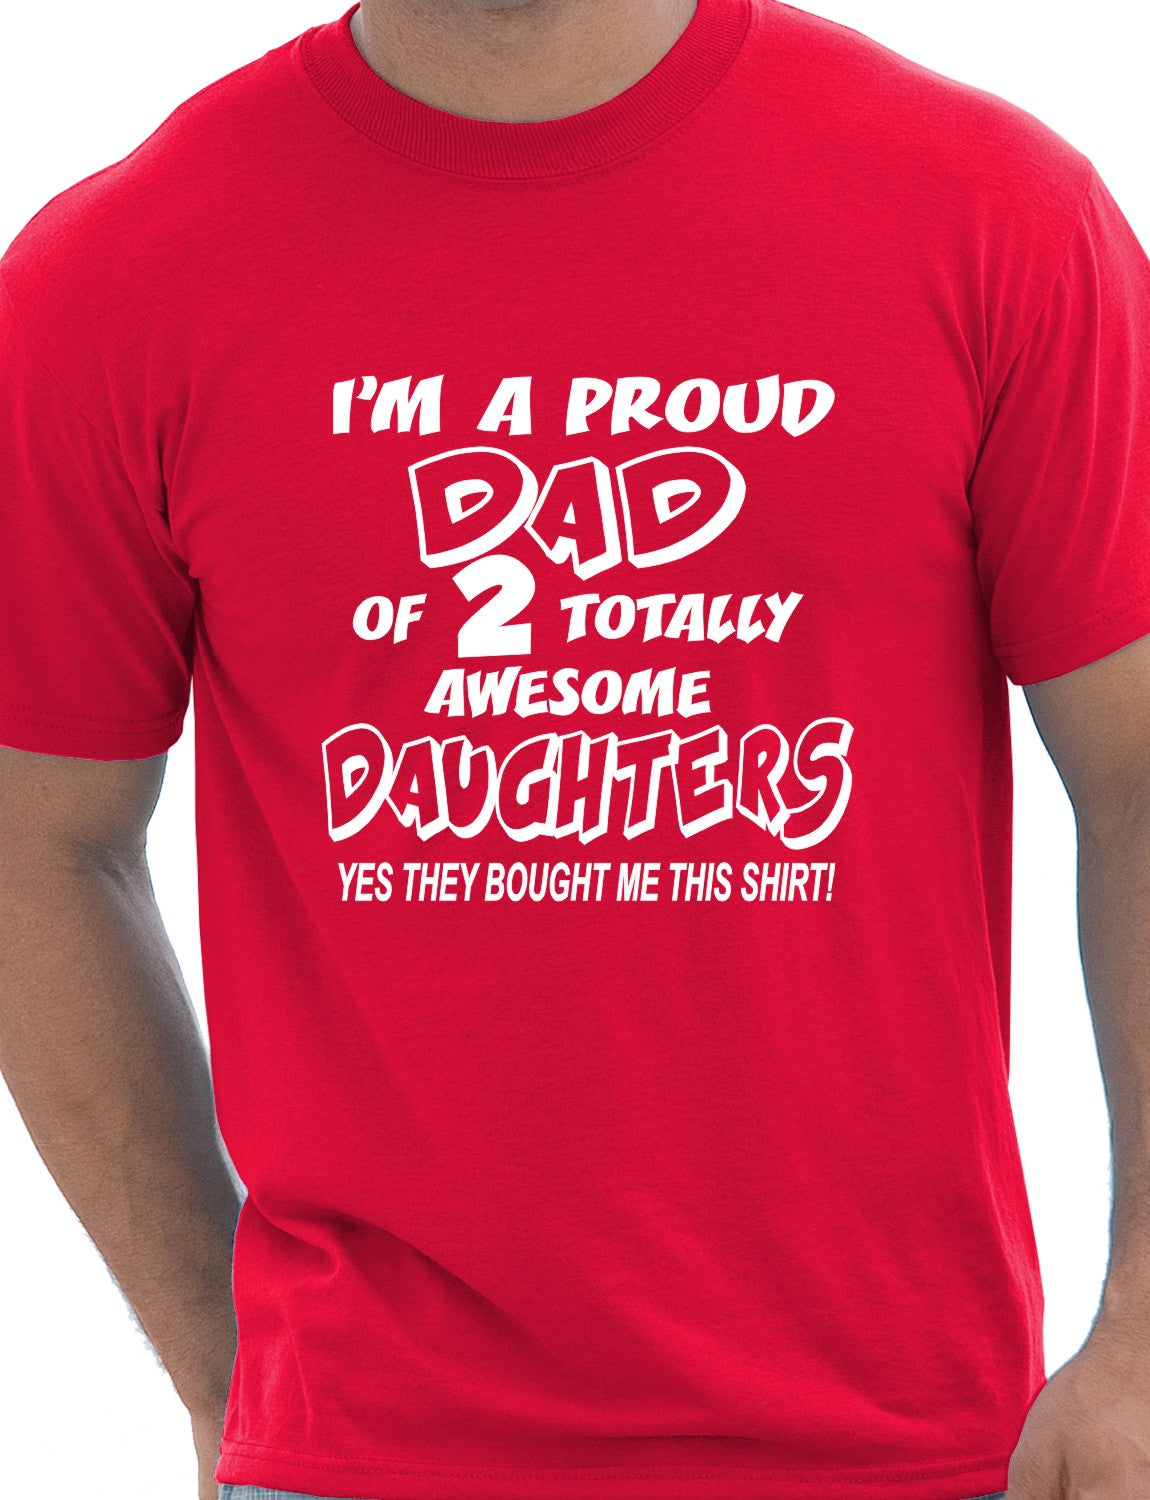 I'm A Proud Dad Of 2 Daughters Mens T-Shirt Size S-XXL